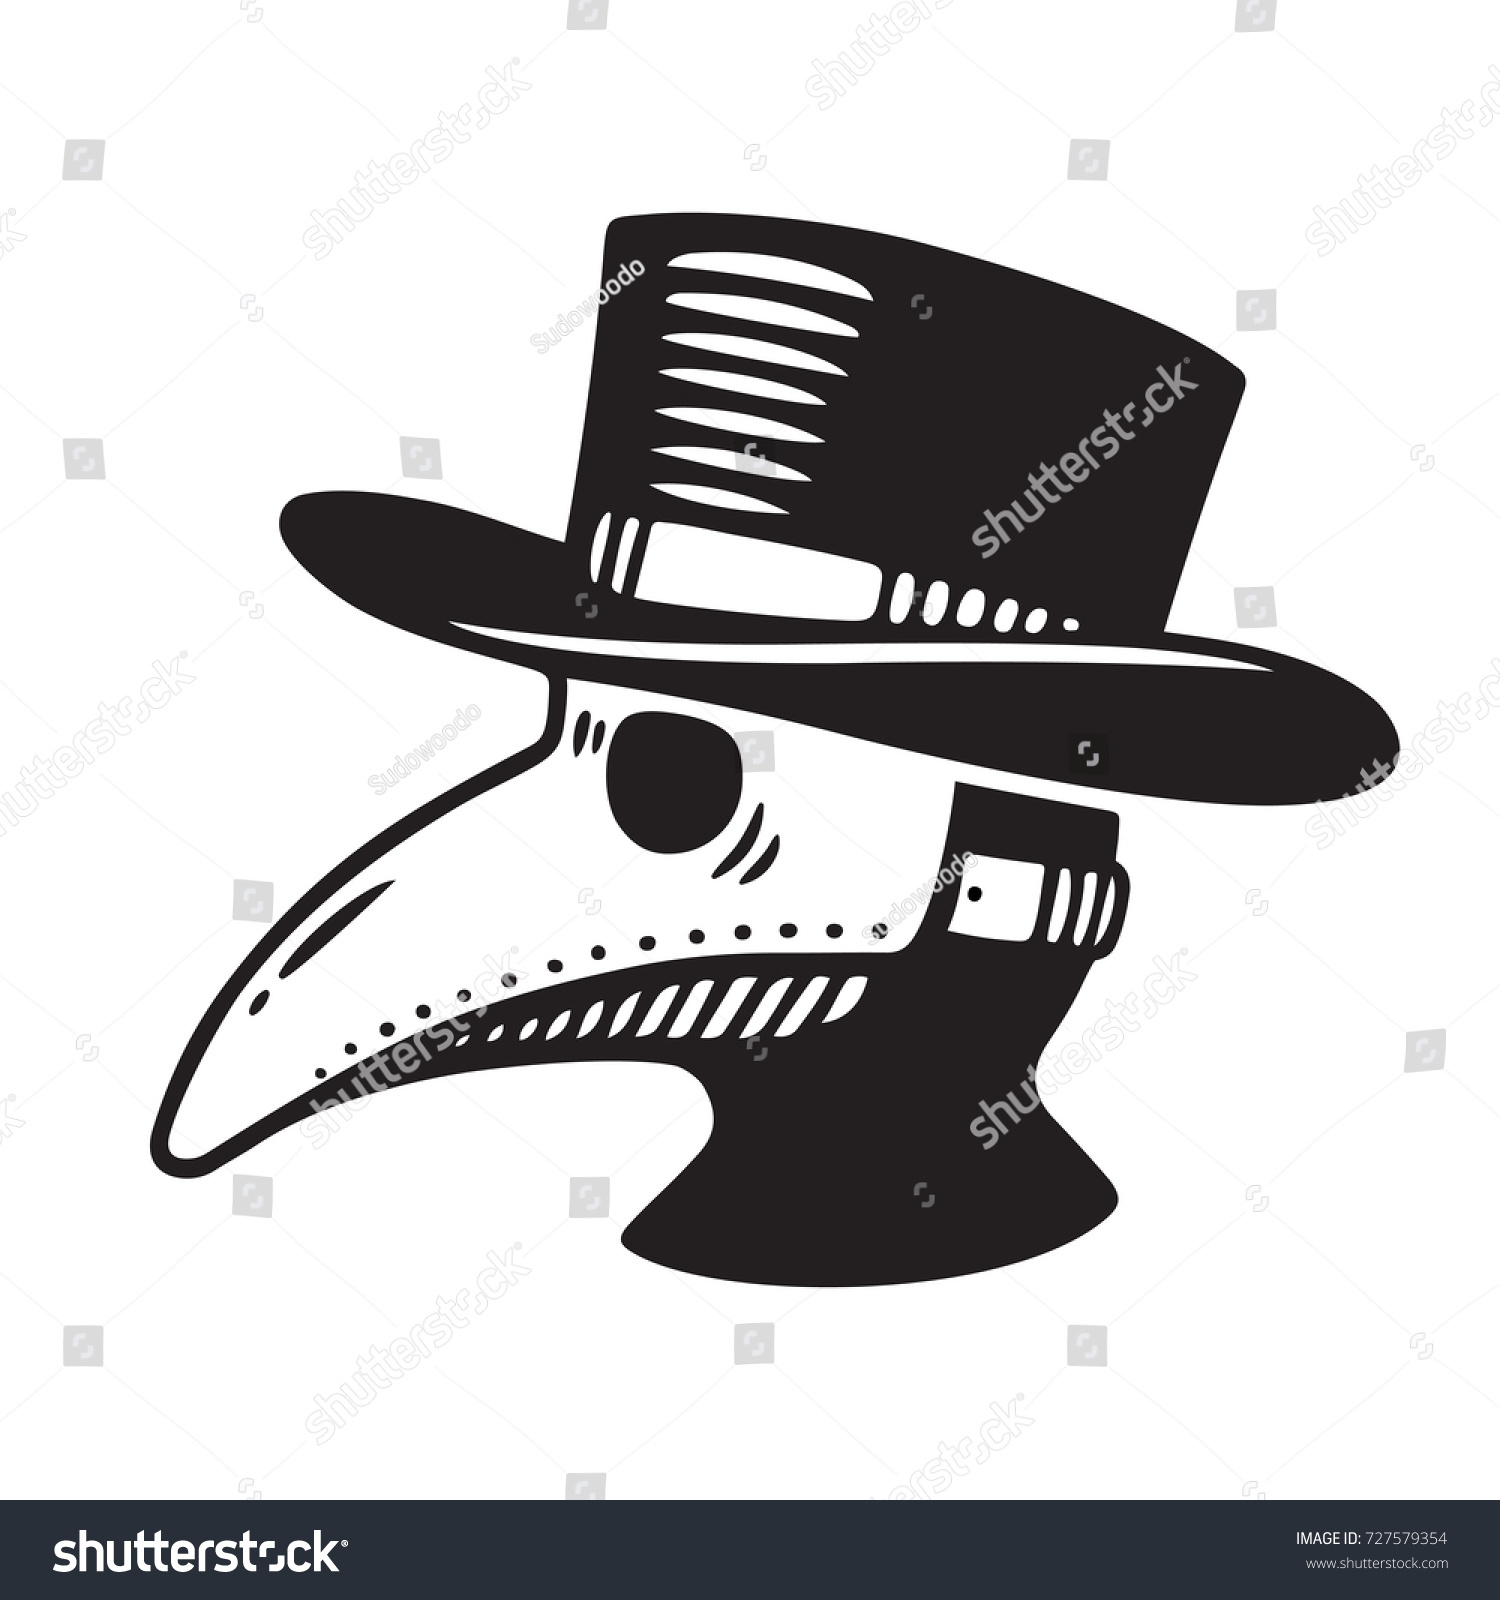 SVG of Plague doctor head profile, with bird mask and hat. Vintage engraving style drawing, black and white vector illustration. svg